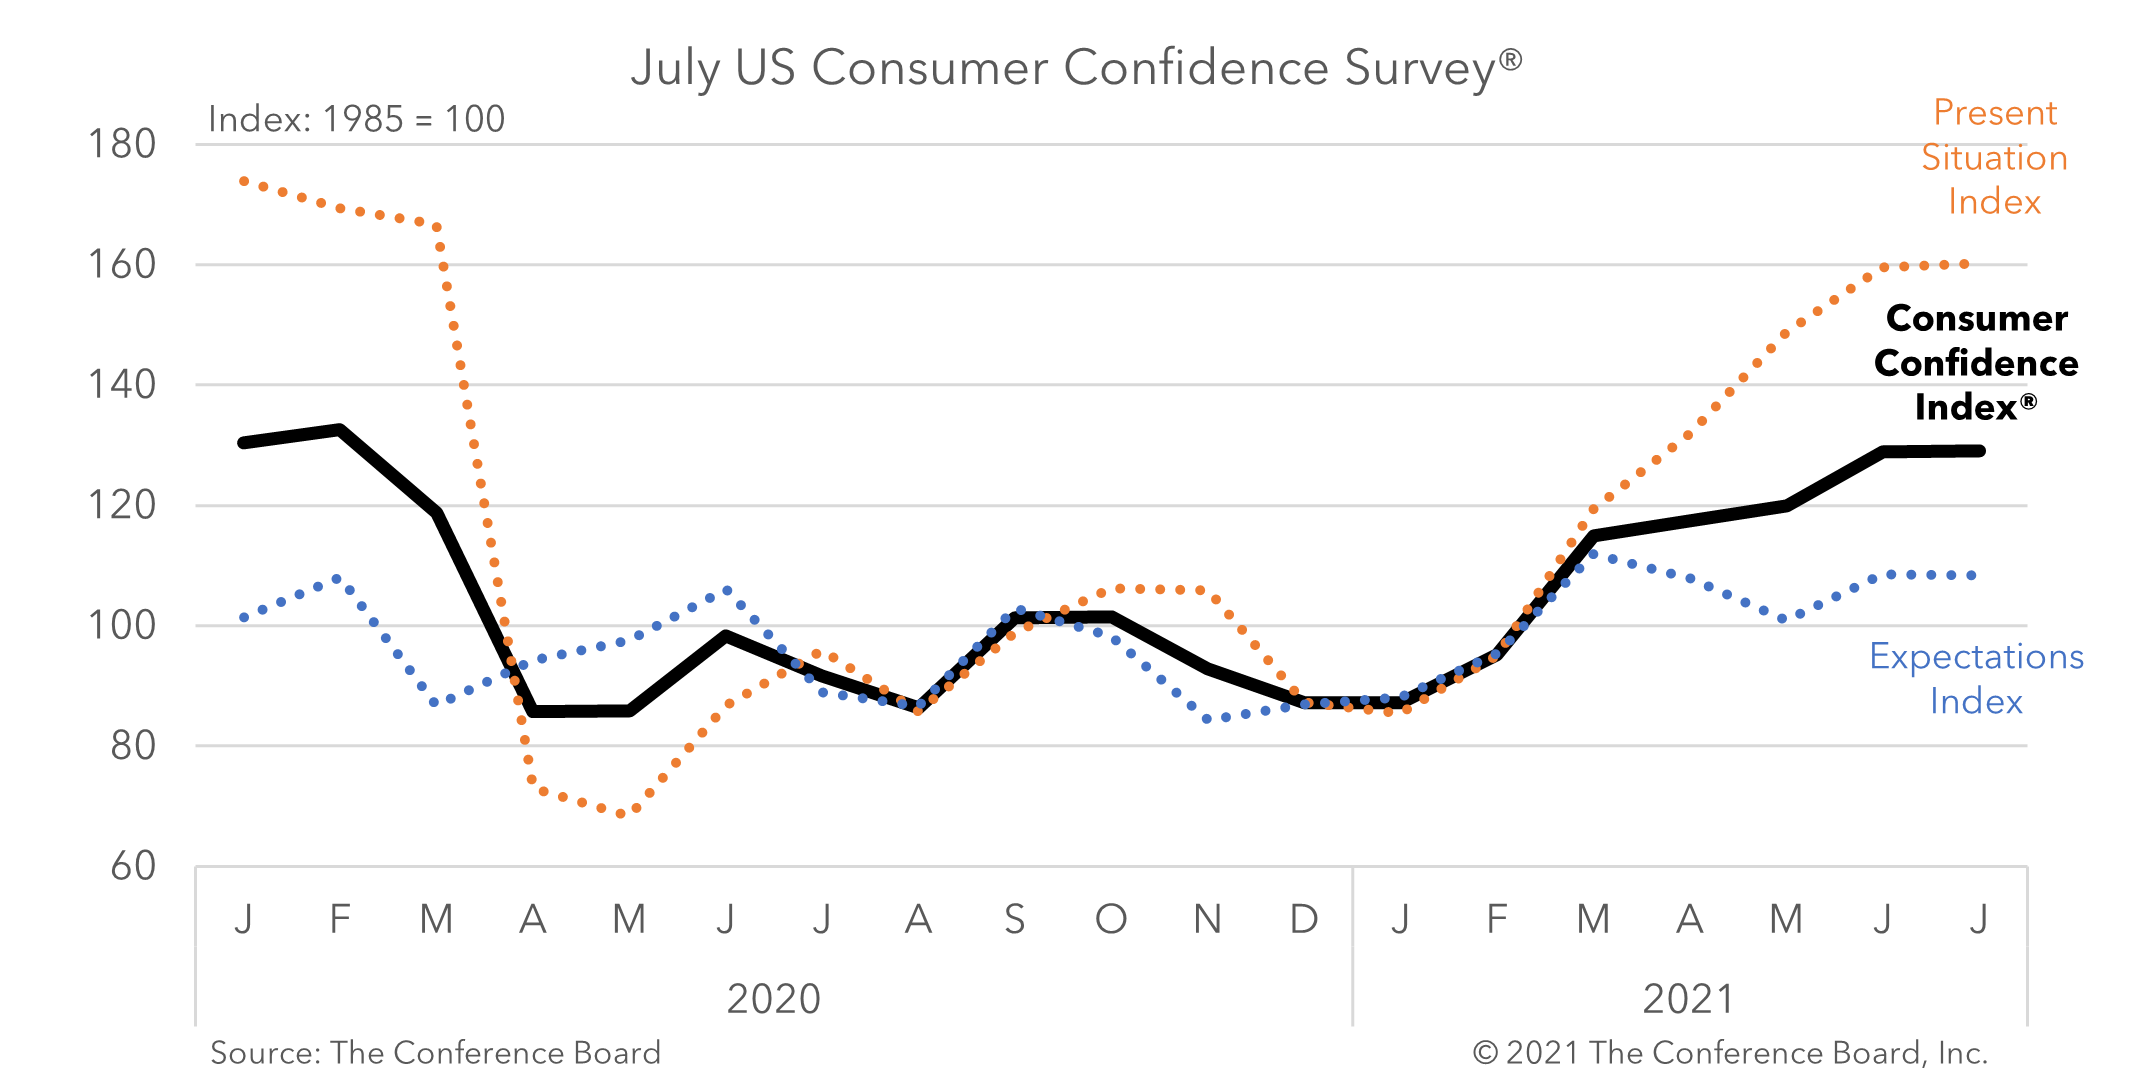 Consumer confidence remains elevated in July